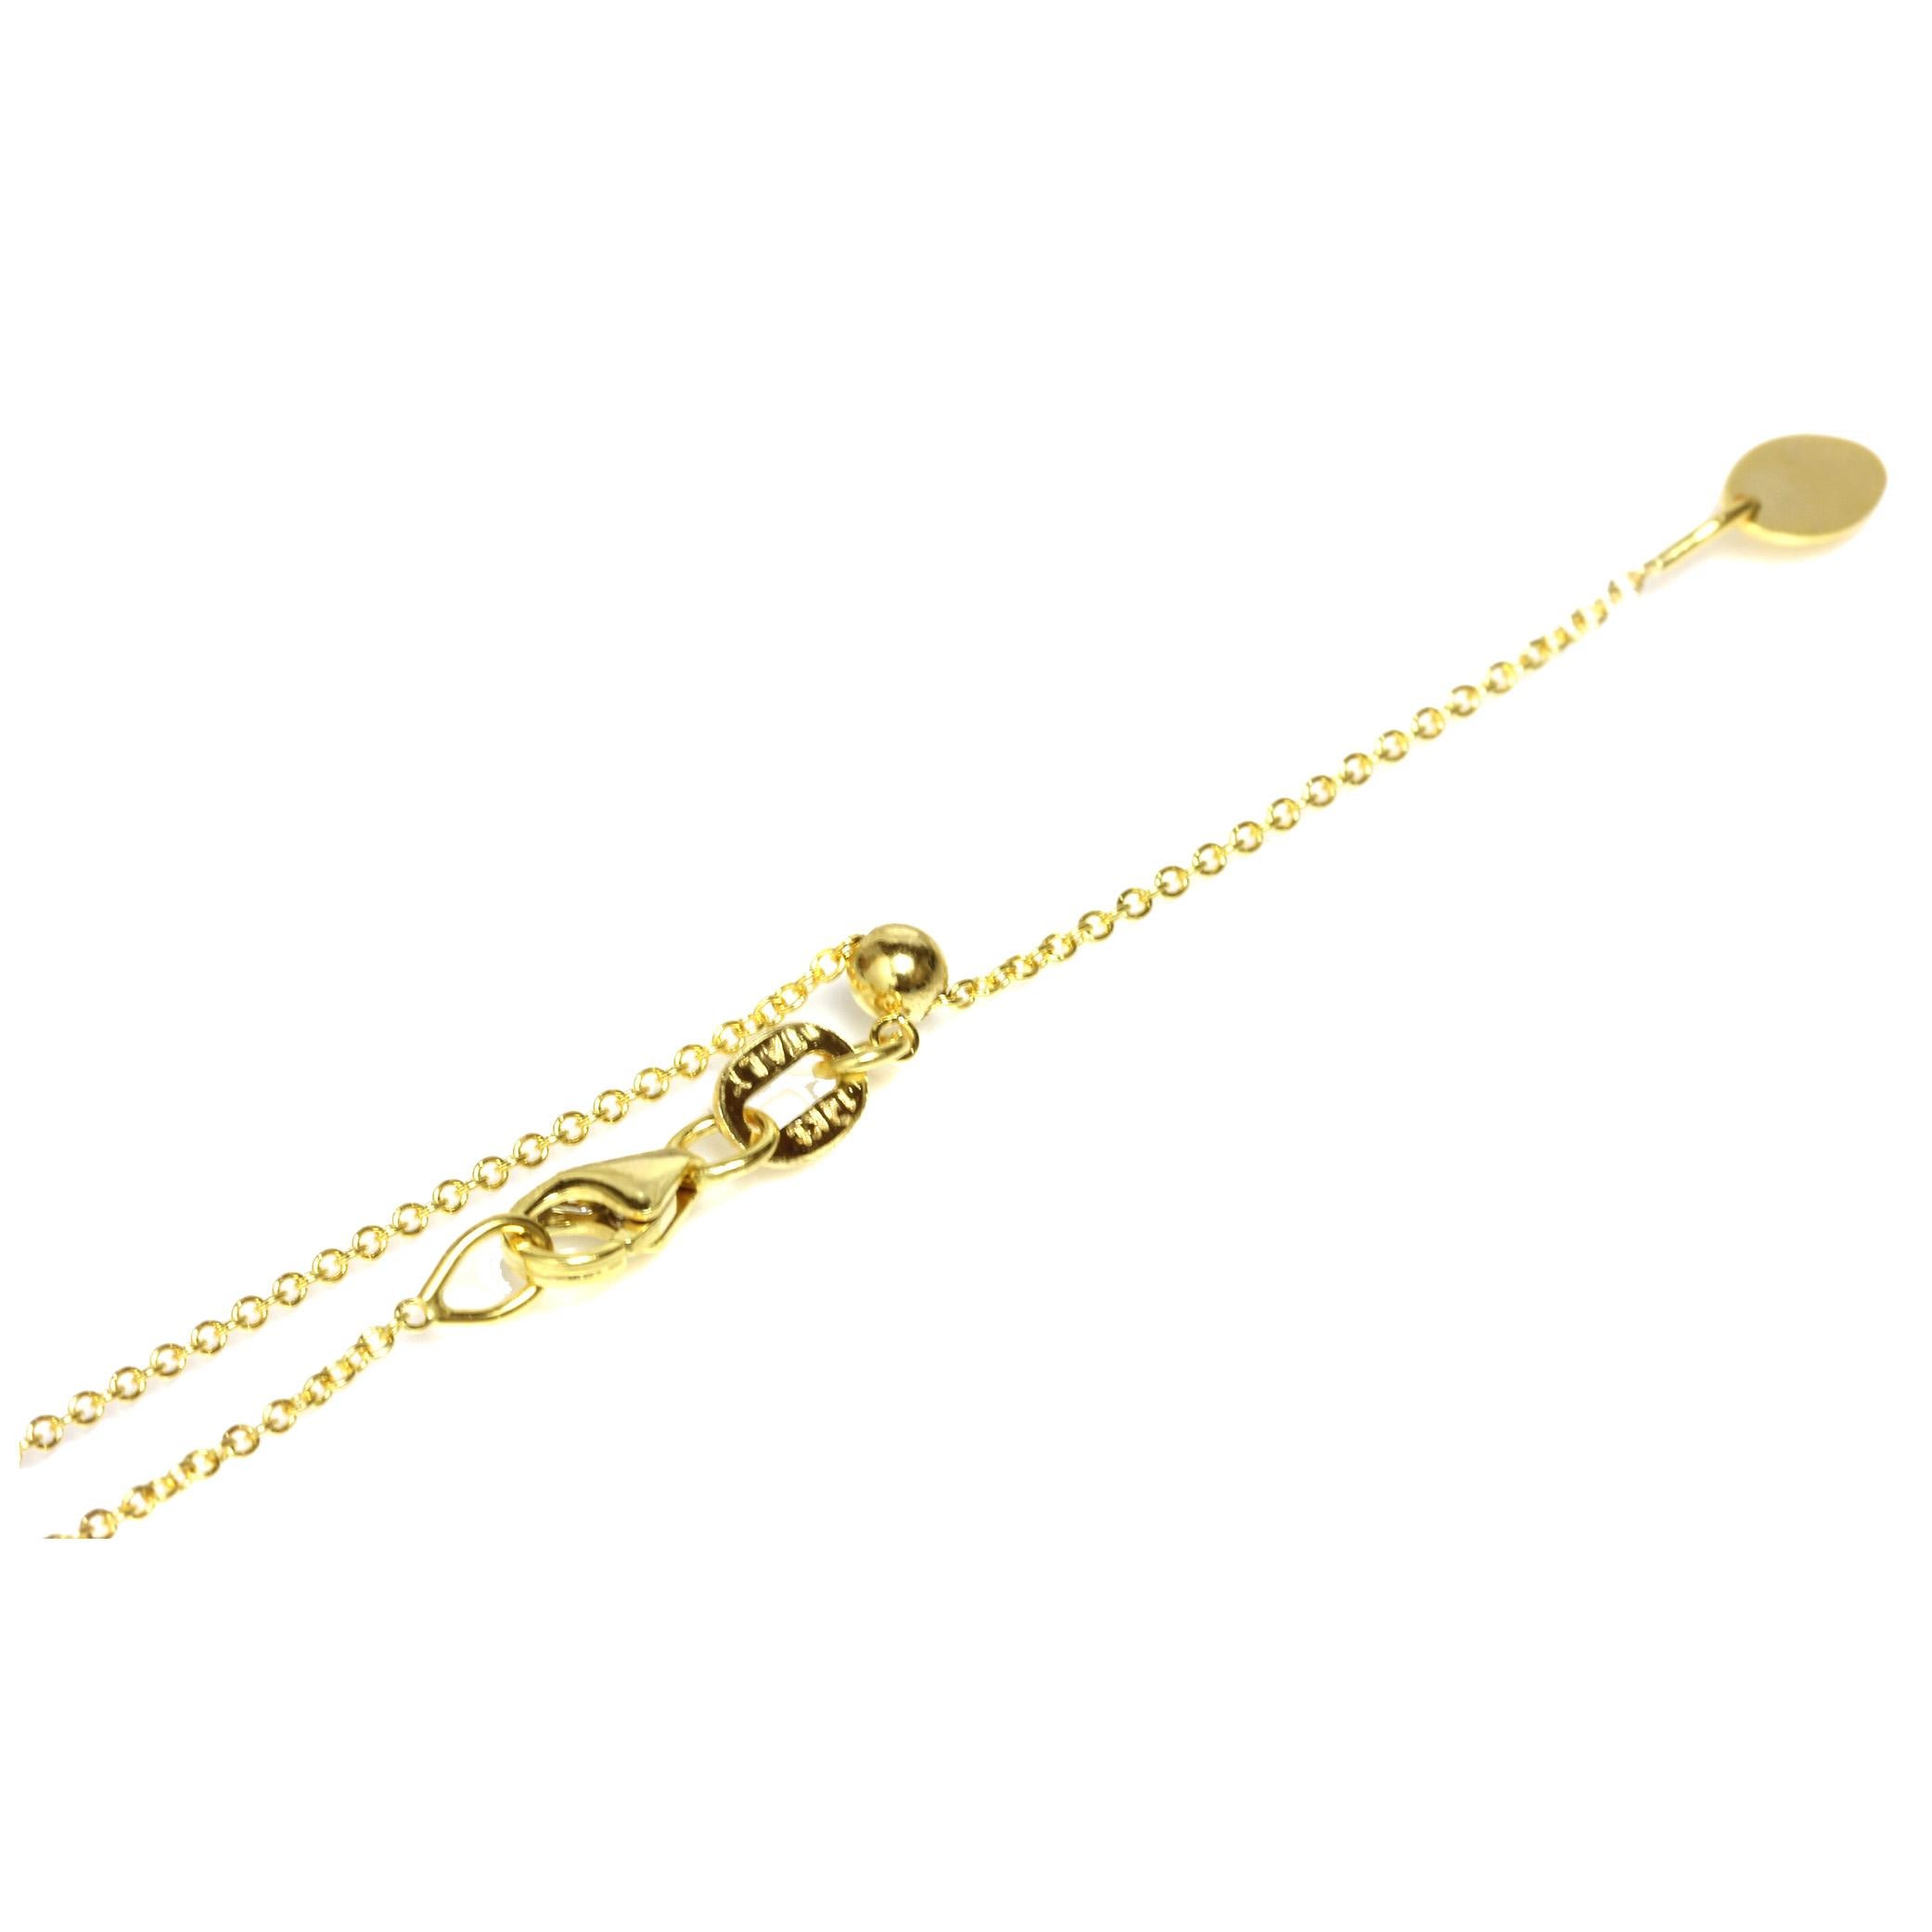 Easy to use adjustable length solid 14k yellow gold chain, you can simply slide the ball to shorten the necklace to any shorter length you wish. The chain is made in Italy and it is stamped 14k. The chain is 1.3mm in thickness and 24